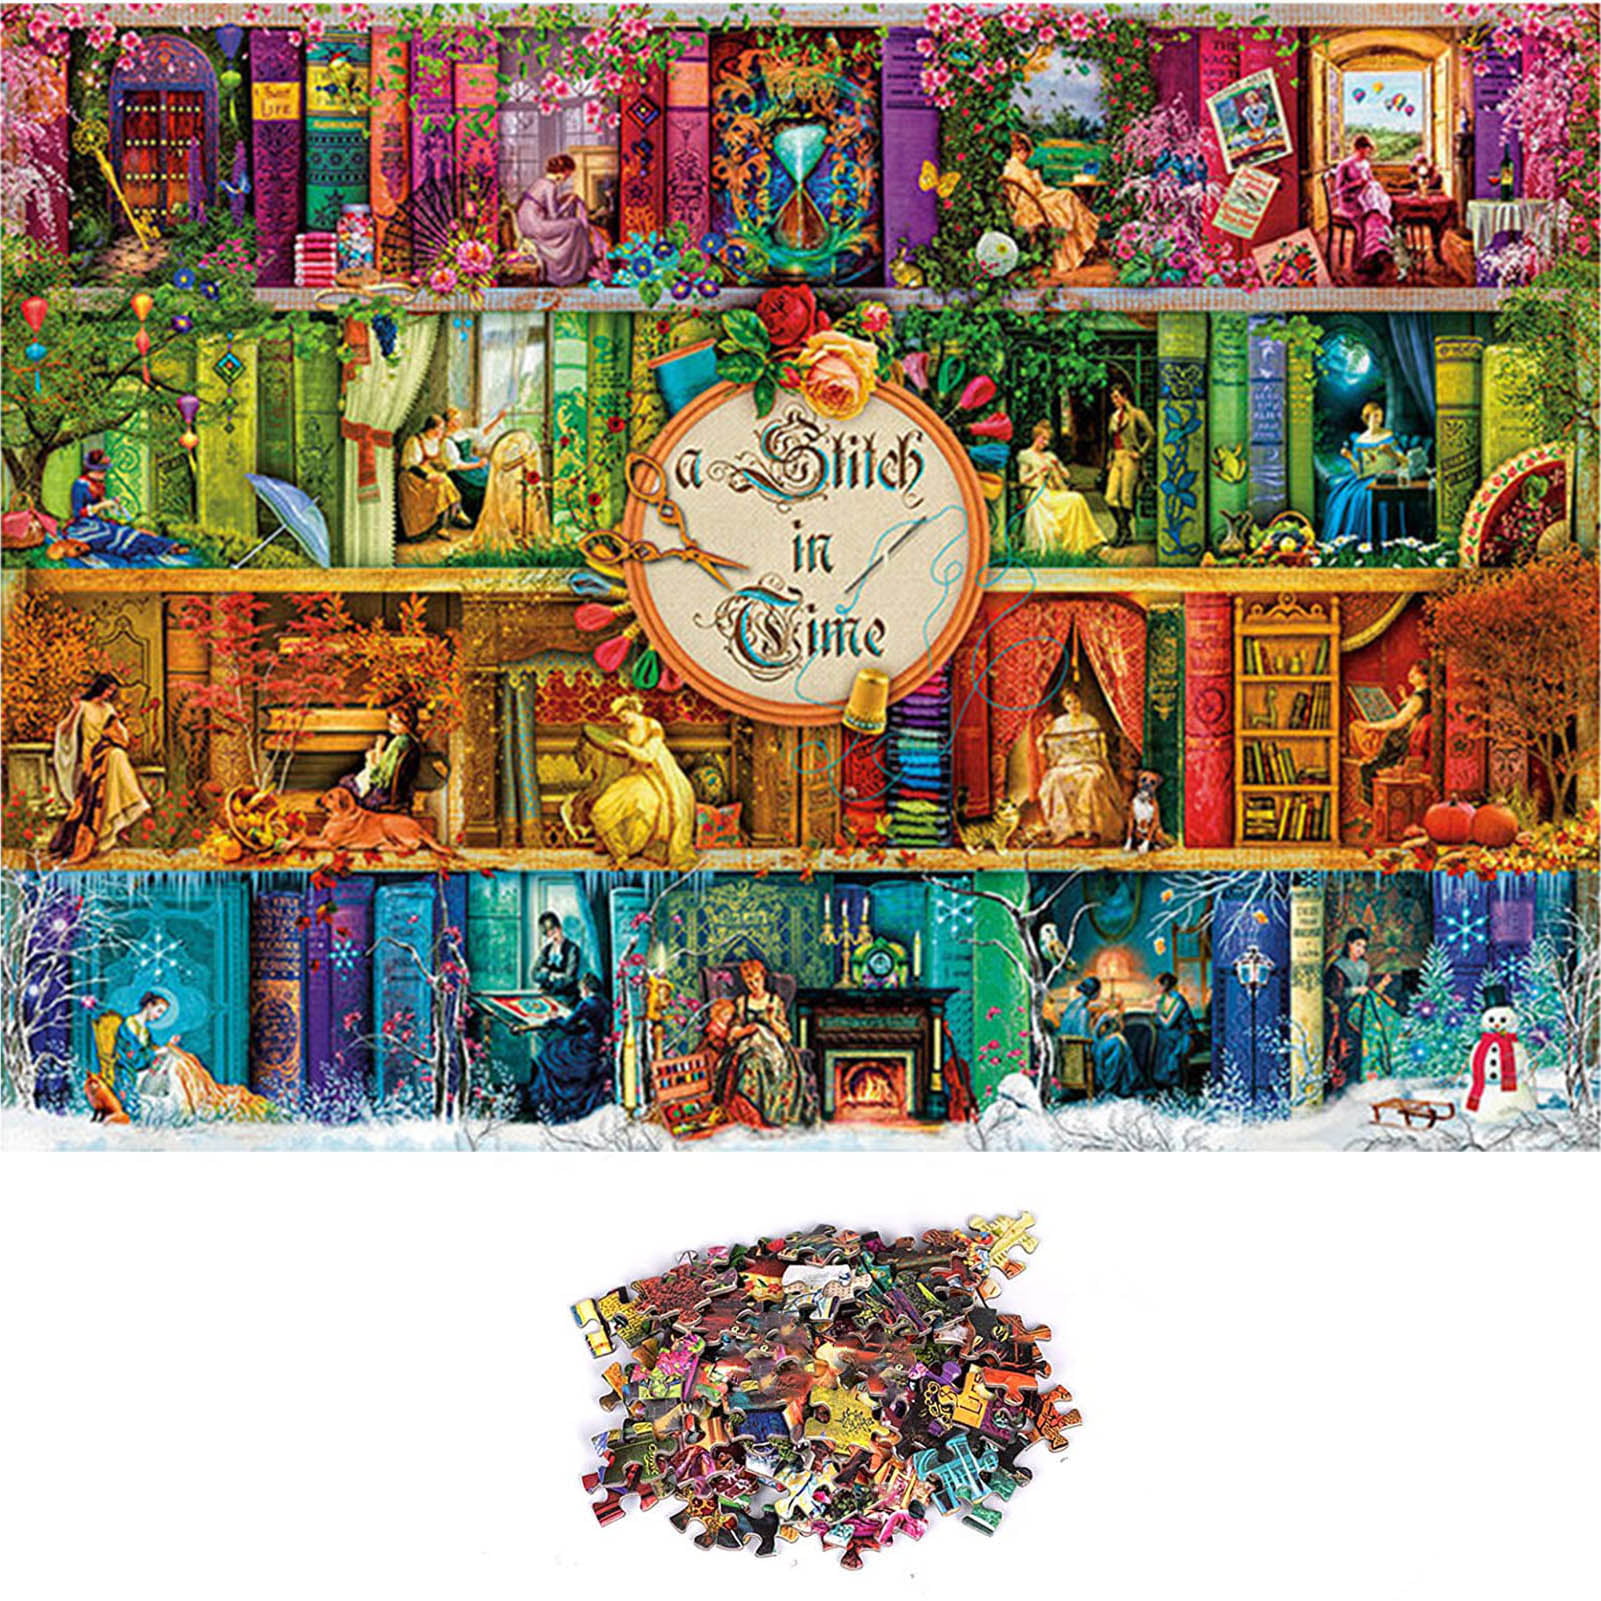 Jigsaw Puzzle 4000 Piece Hund-4000 Entertainment Wooden Puzzles Toys Educational Intellectual Fun Puzzle Games for Kids Adults Toys